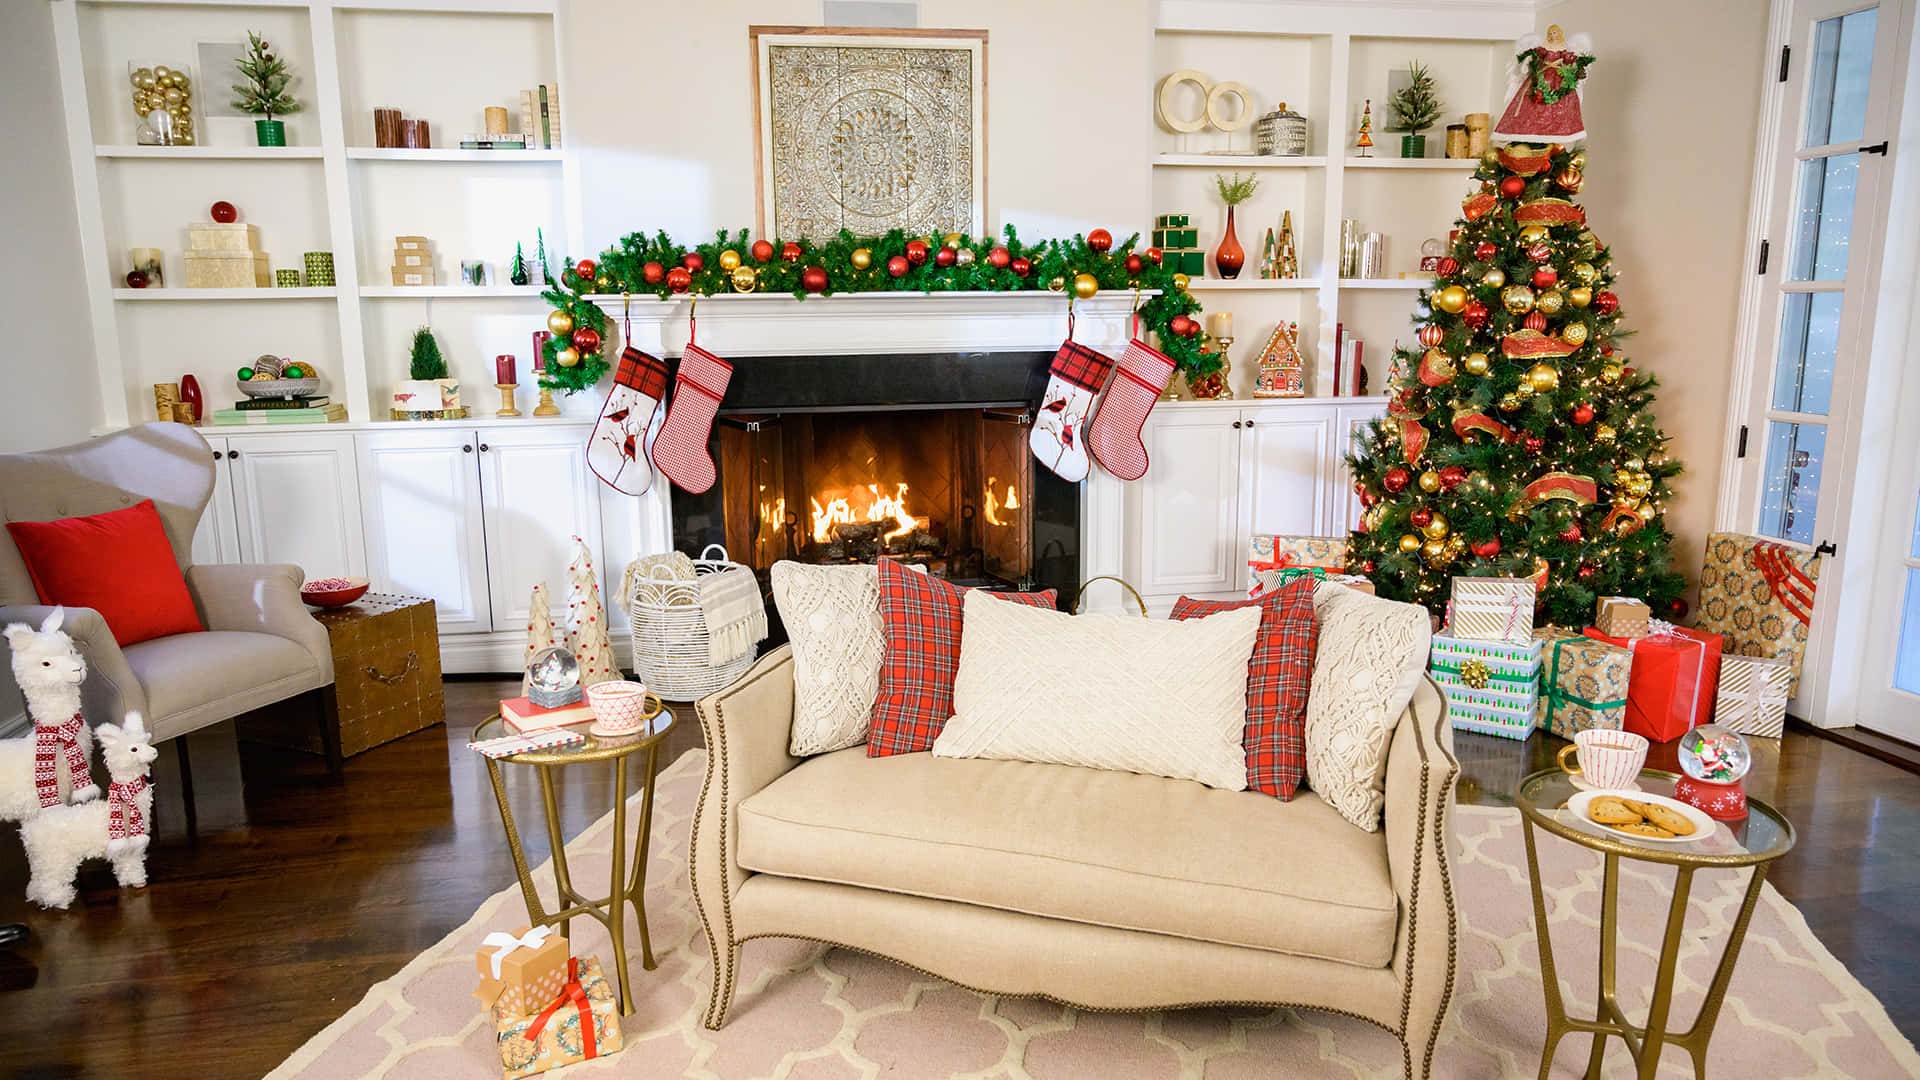 Stay cosy and warm next to a crackling fireplace